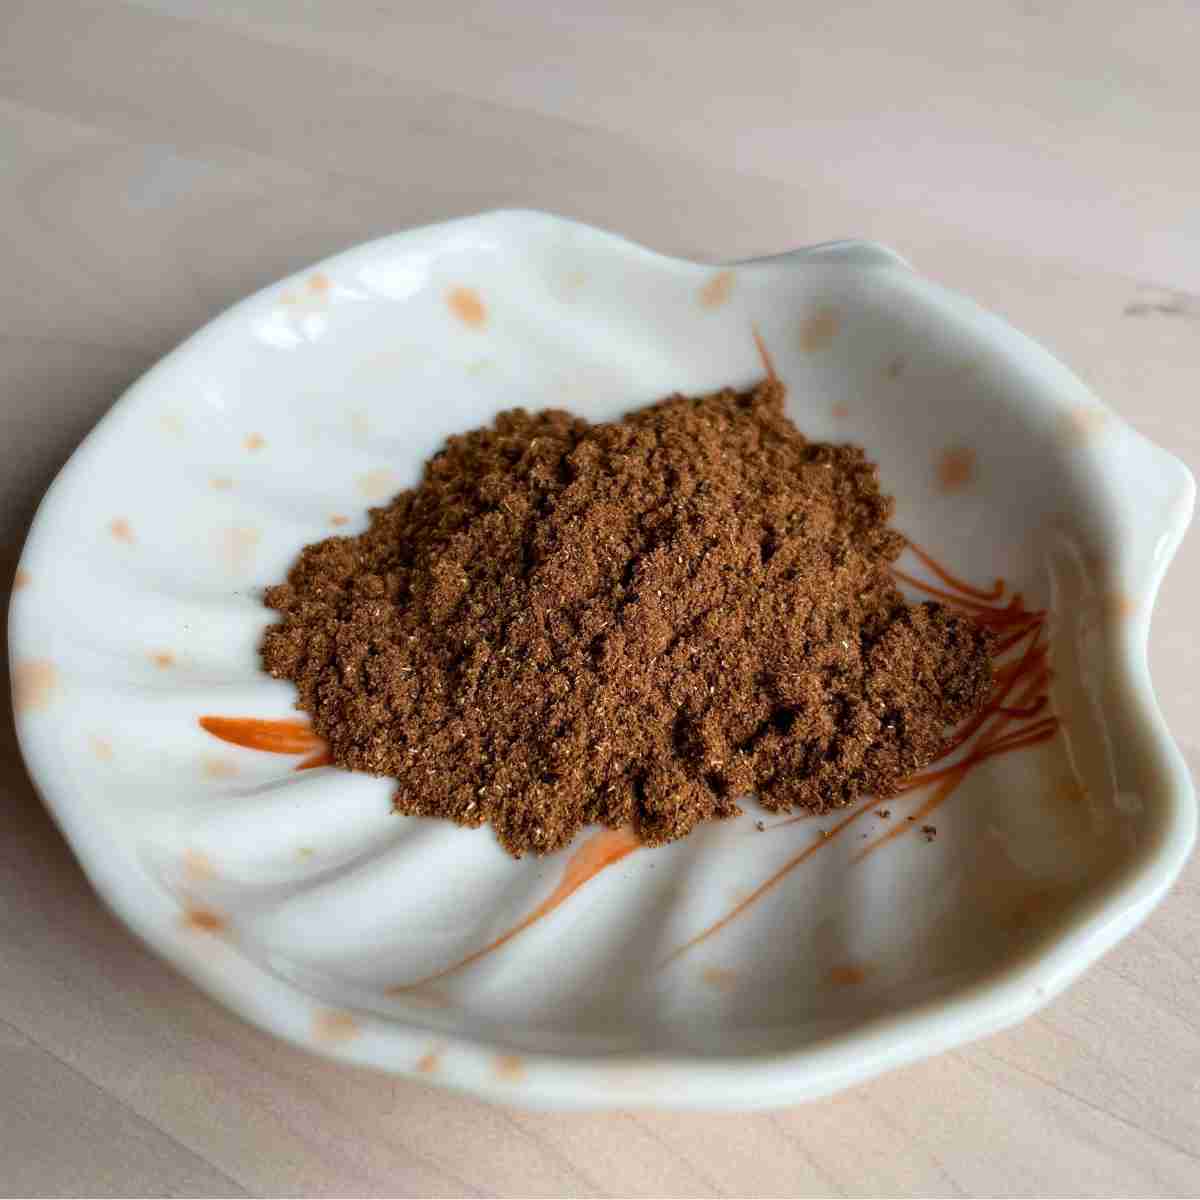 Chinese five spice powder